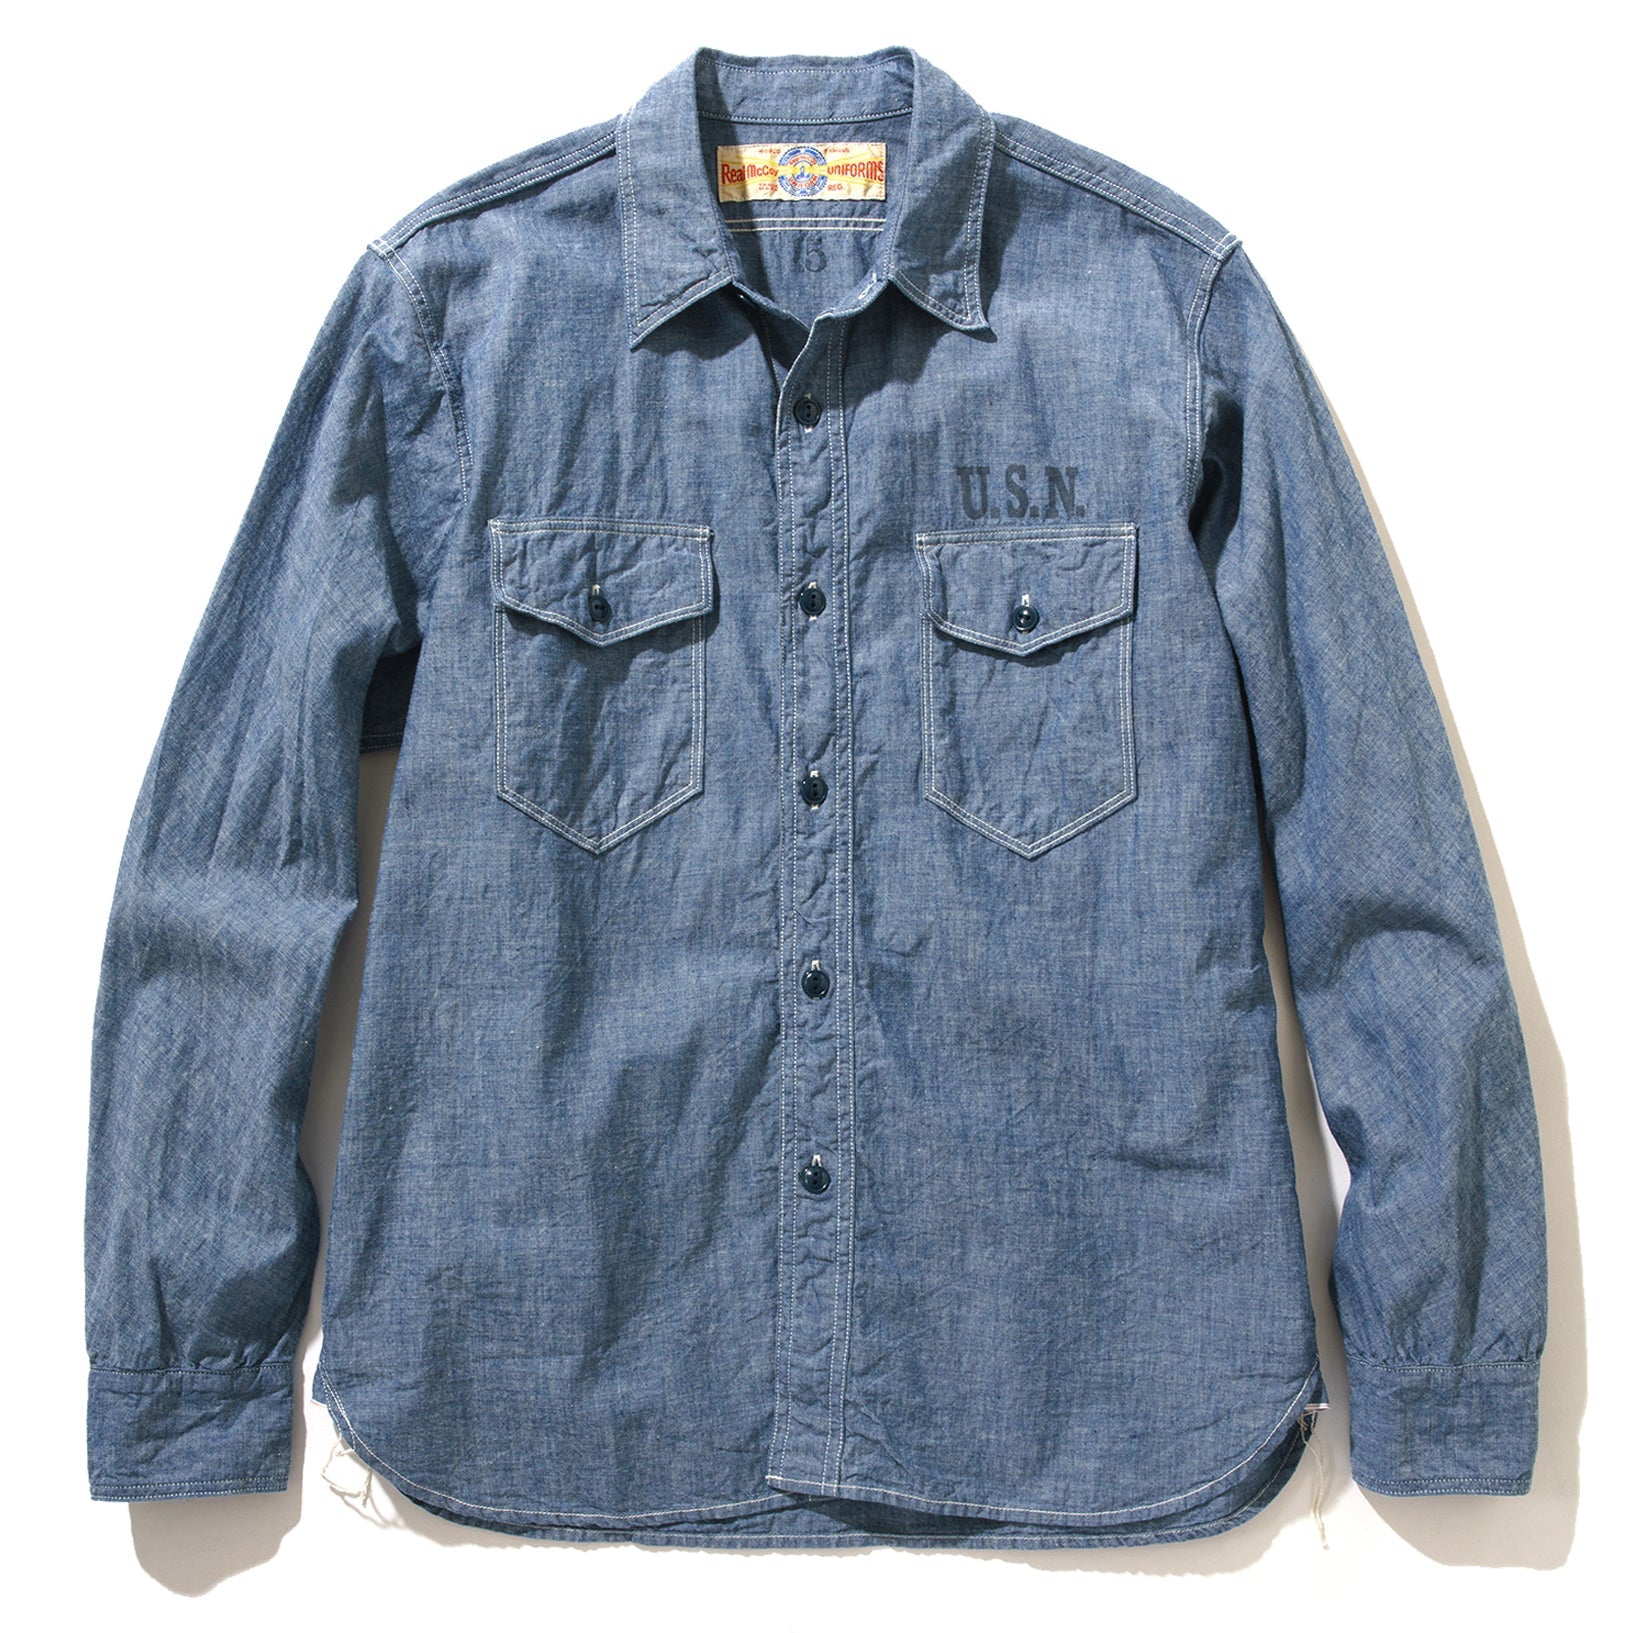 http://therealmccoys.com/cdn/shop/products/USN-CHAMBRAY-SHIRT-STENCIL-BRIGHTERSQUARE1.jpg?v=1685011667